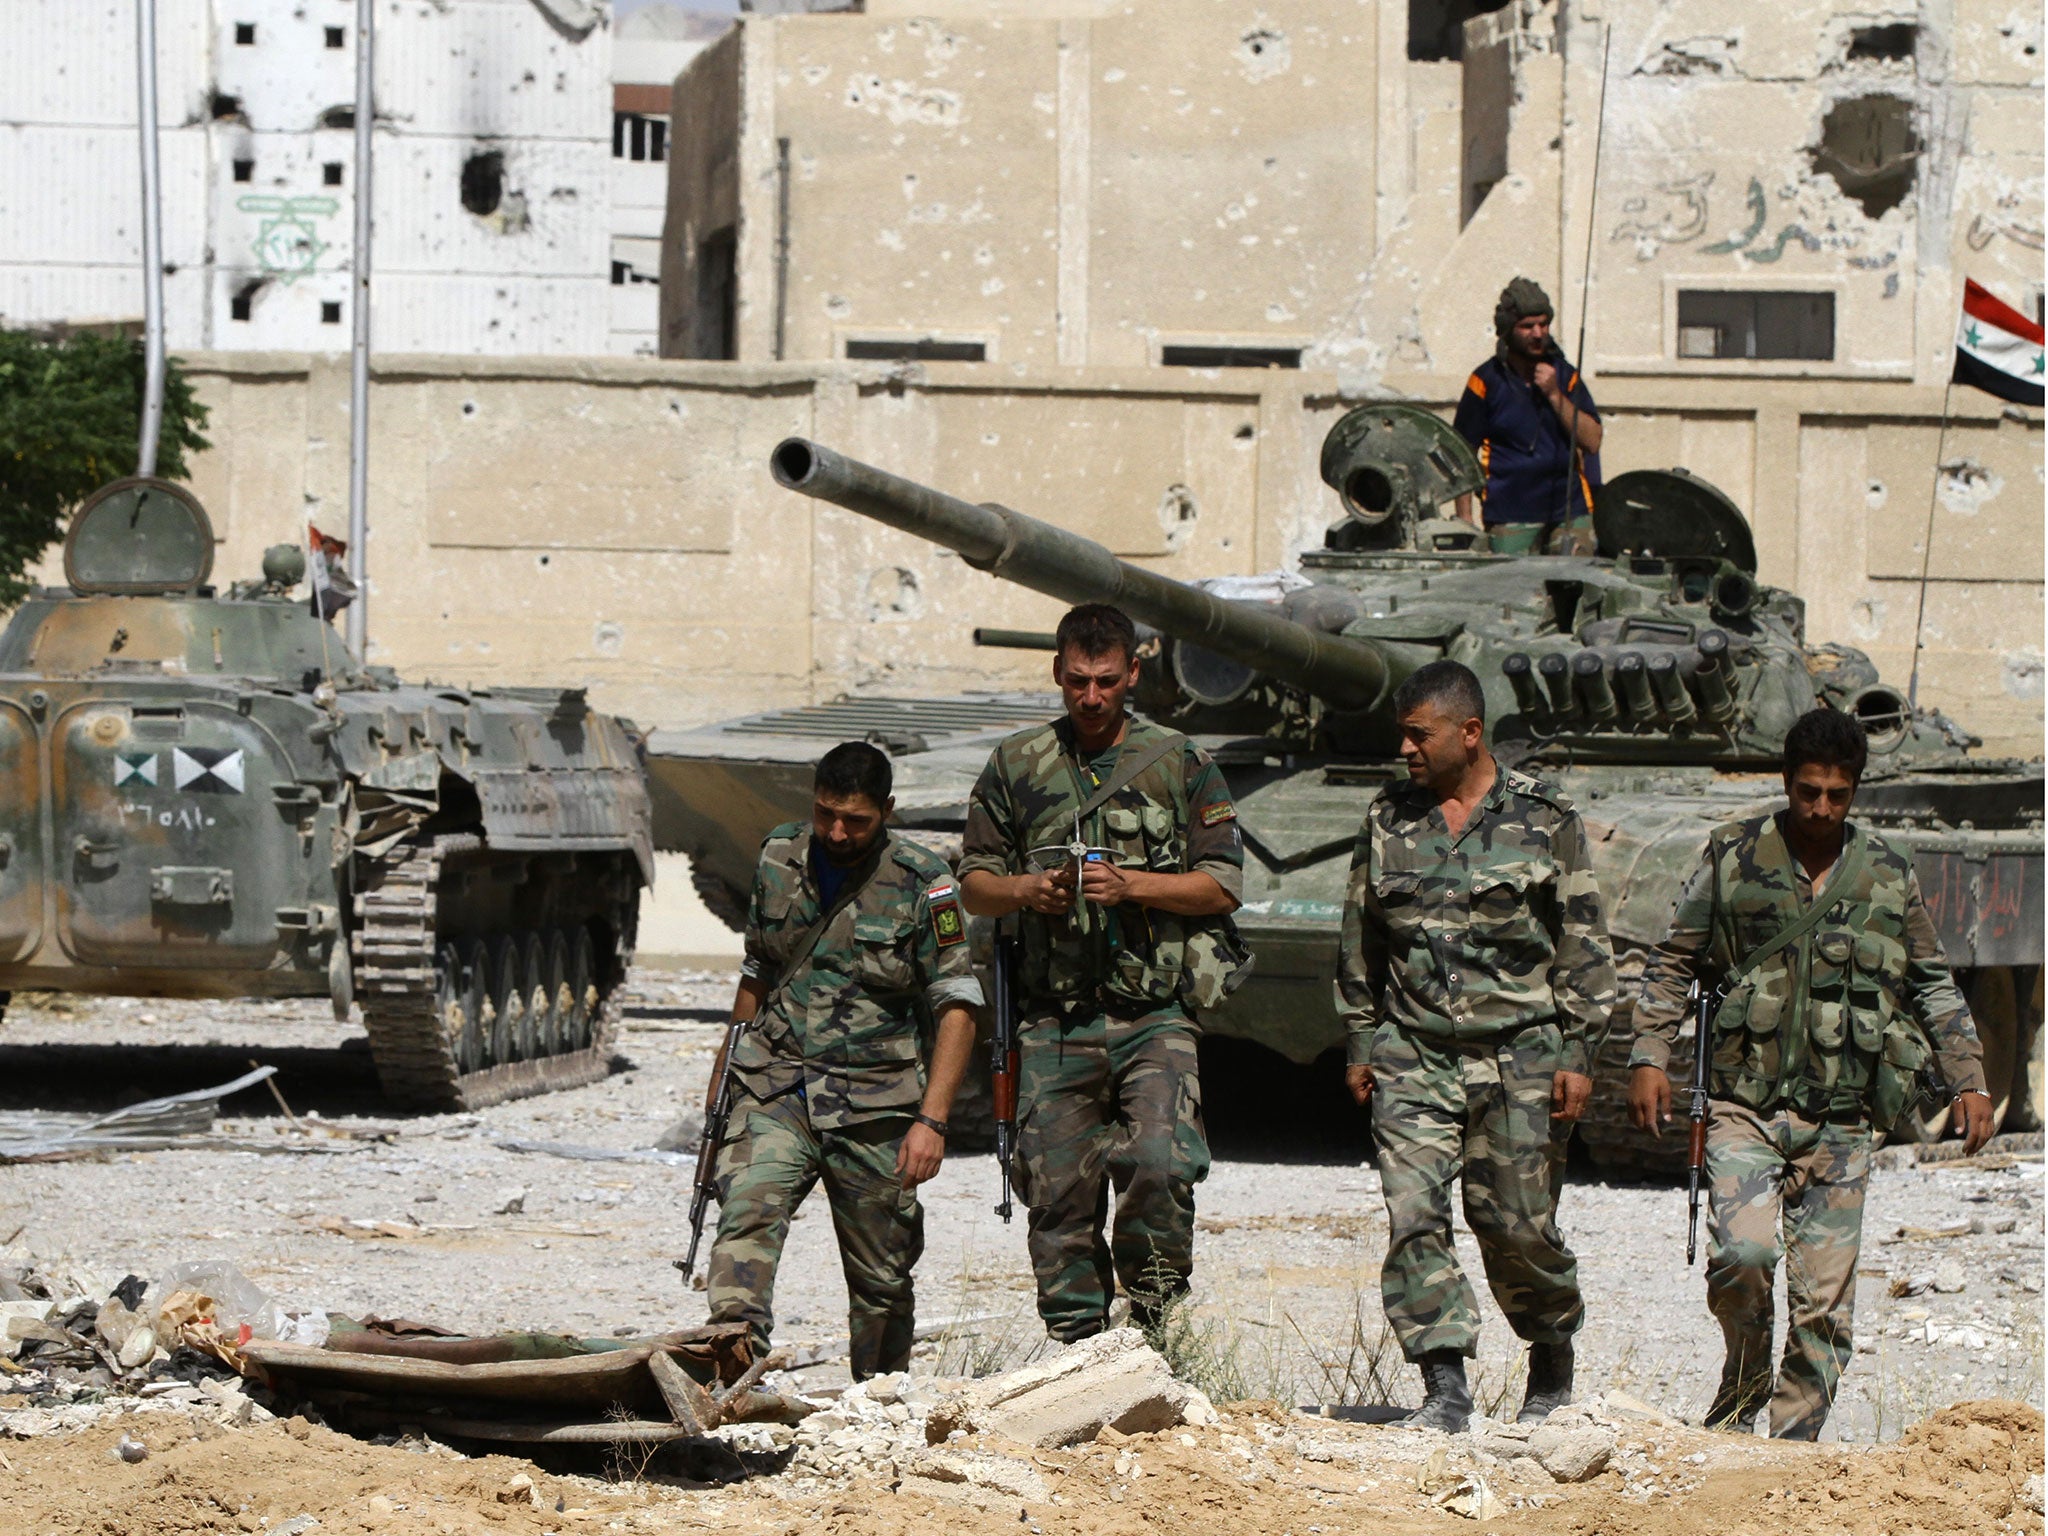 Syrian government soldiers walk near tanks parked in front of damaged buildings in Adra northeast of the capital Damascus on 25 September, 2014